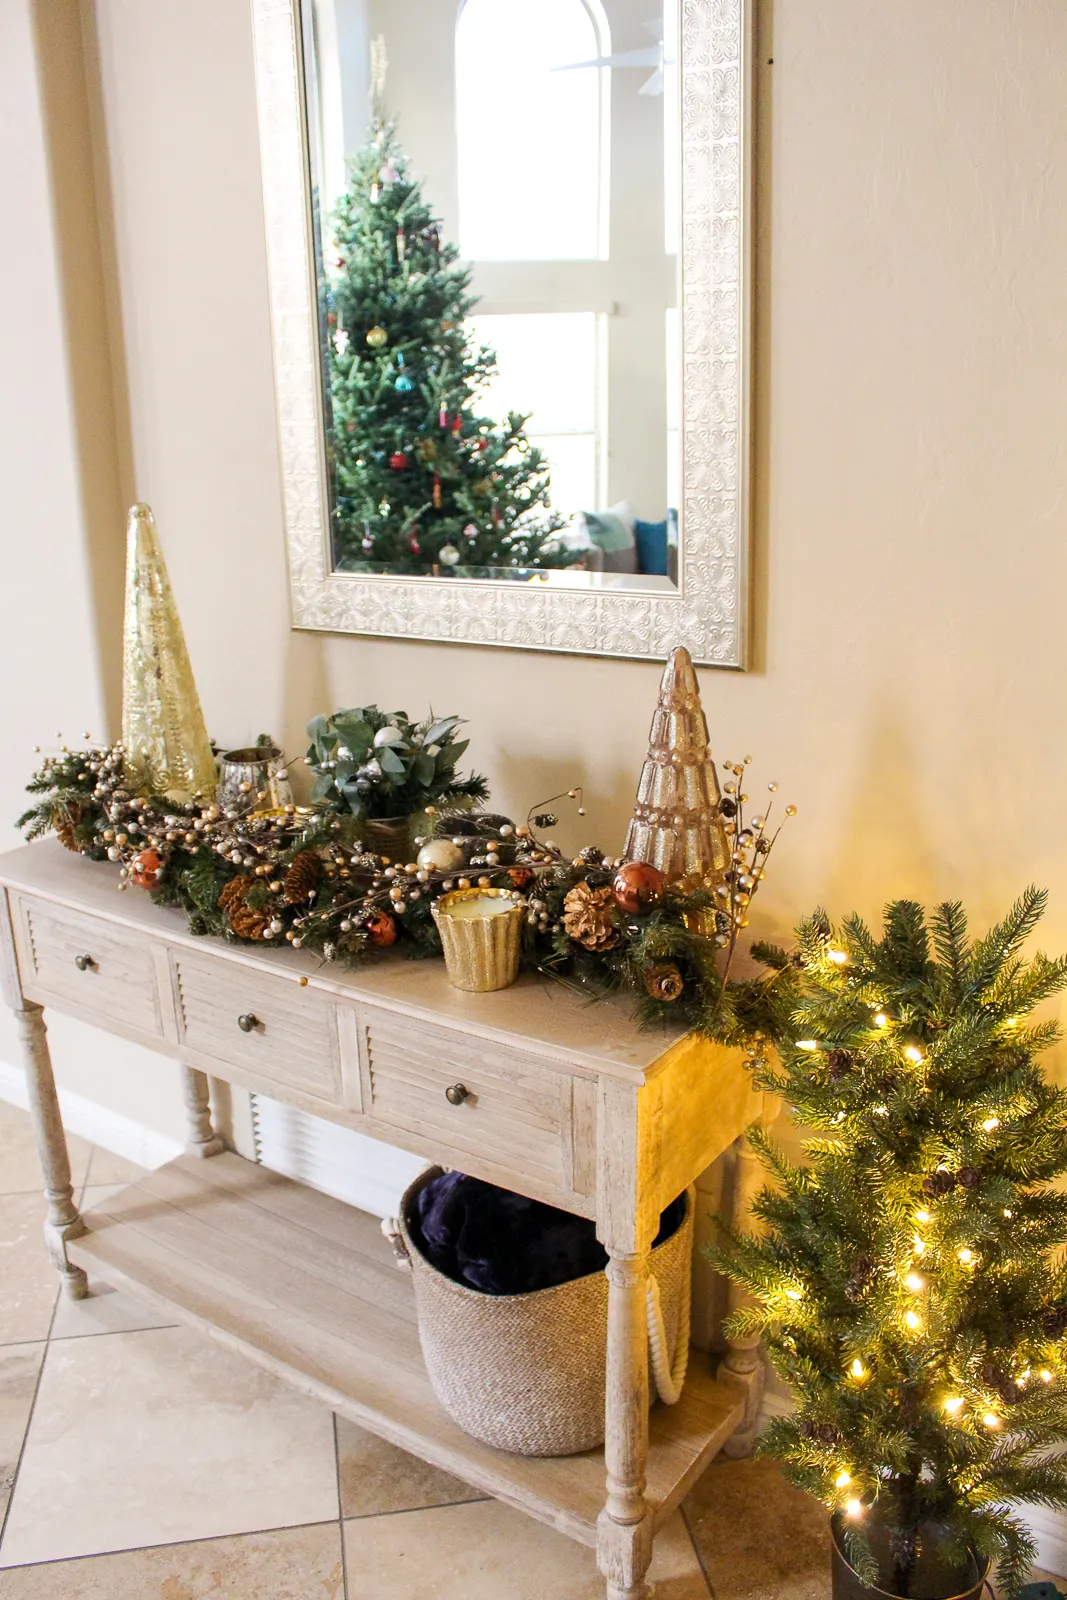 End table with bronze and gold holiday decorations, gold Christmas trees and candles